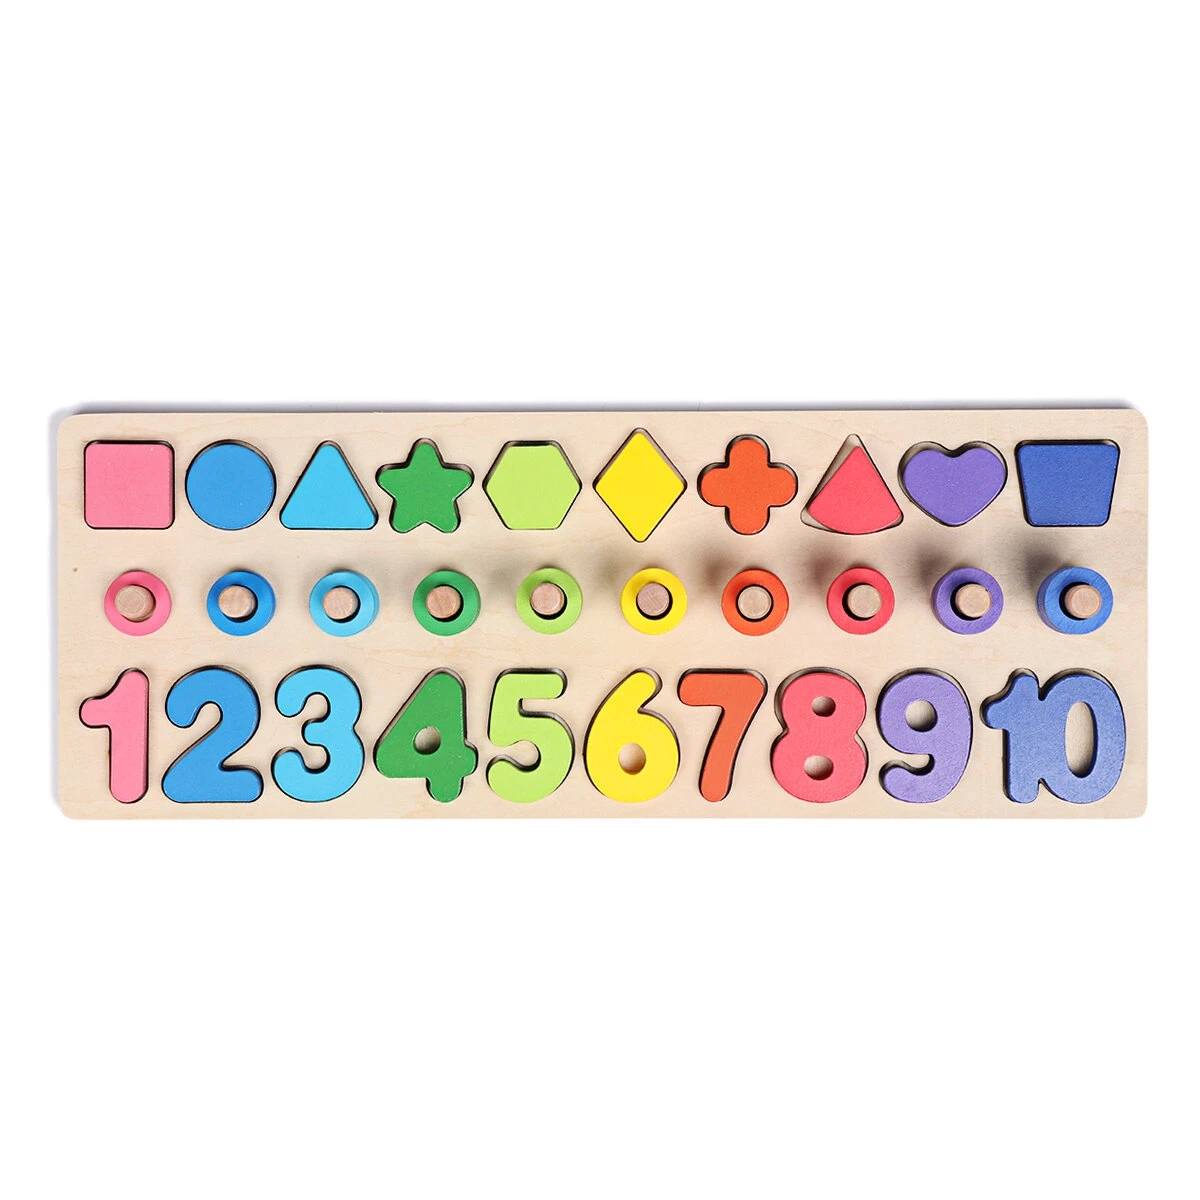 

Educational Counting Geometry Wooden Toys 3 in 1 Board Math Learning Preschool Montessori Early Educational Puzzle Toys